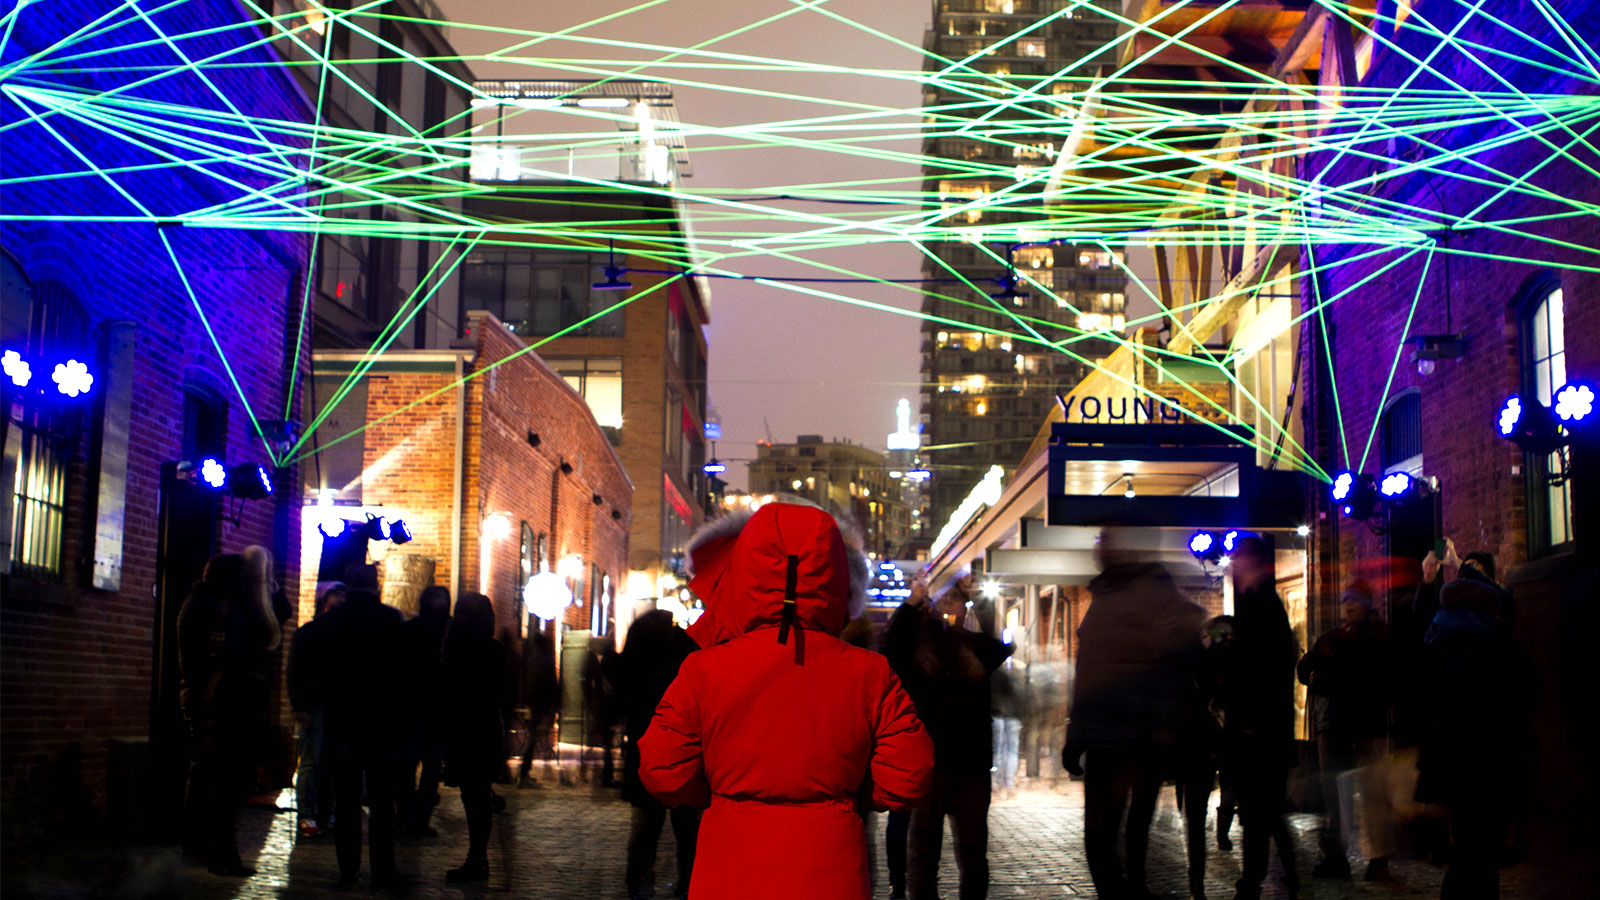 A woman in a red Canada Goose Jacket looks down an alley under a web of green light at the Toronto LightFest in the Distillery District